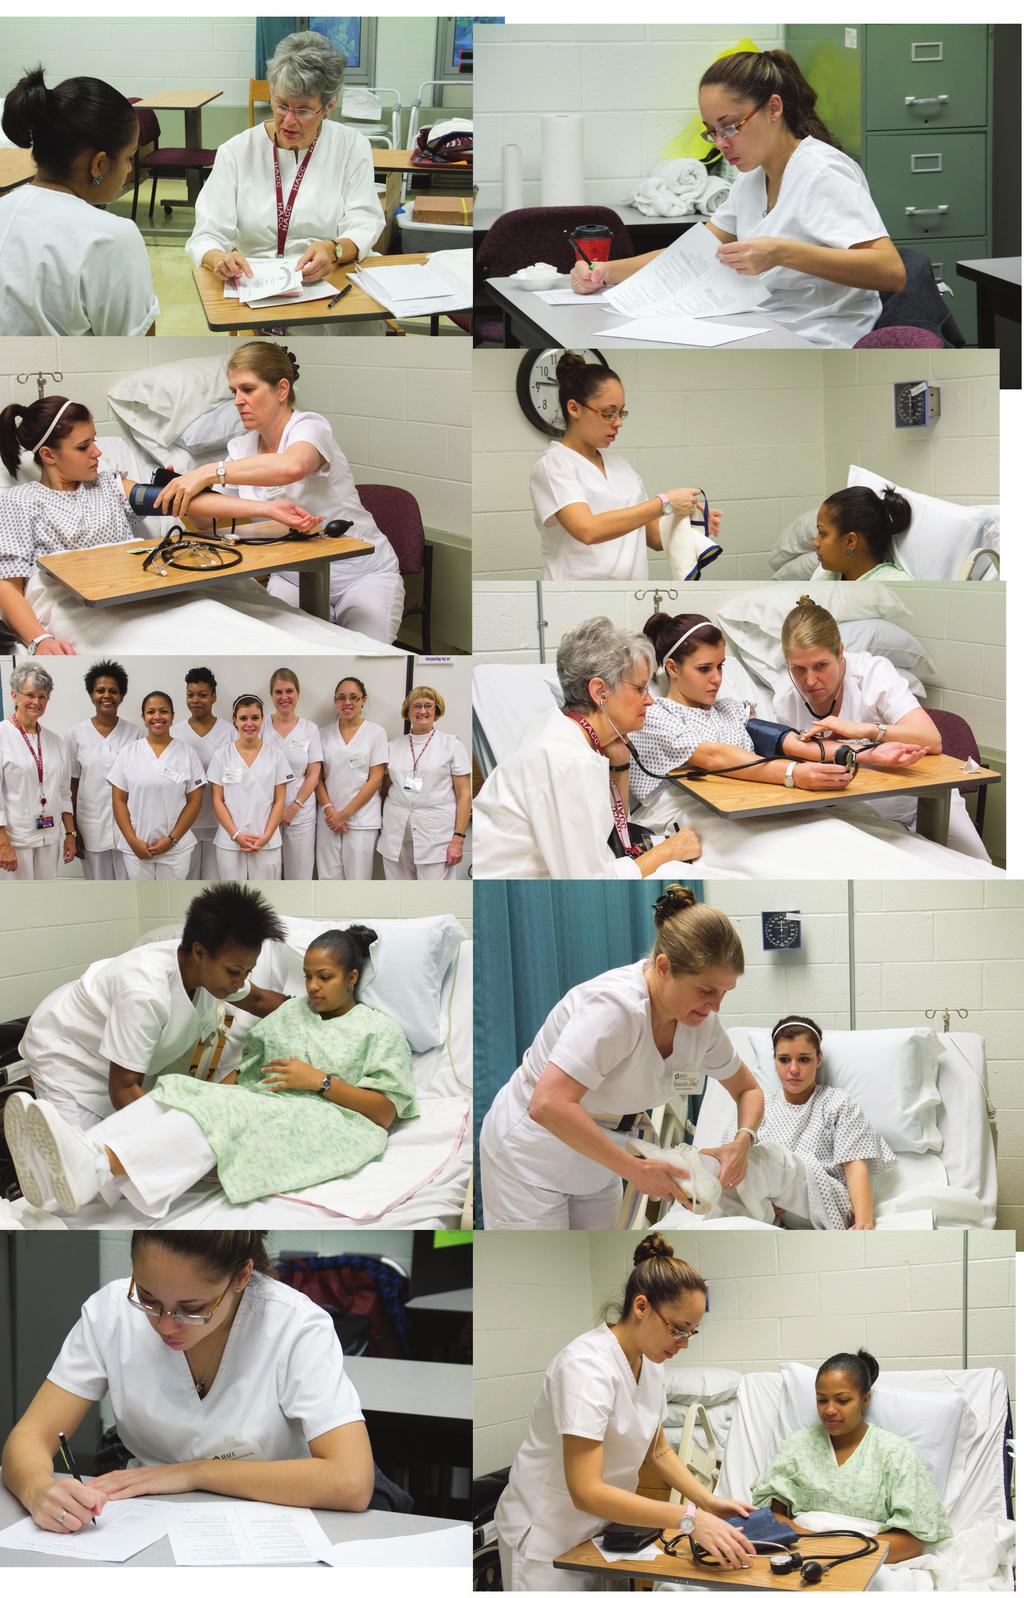 Physician Office Assistant Nurse Aide Training Classes Healthcare Education/Workforce Development and Continuing Education Division HACC also offers affordable continuing education classes that meet